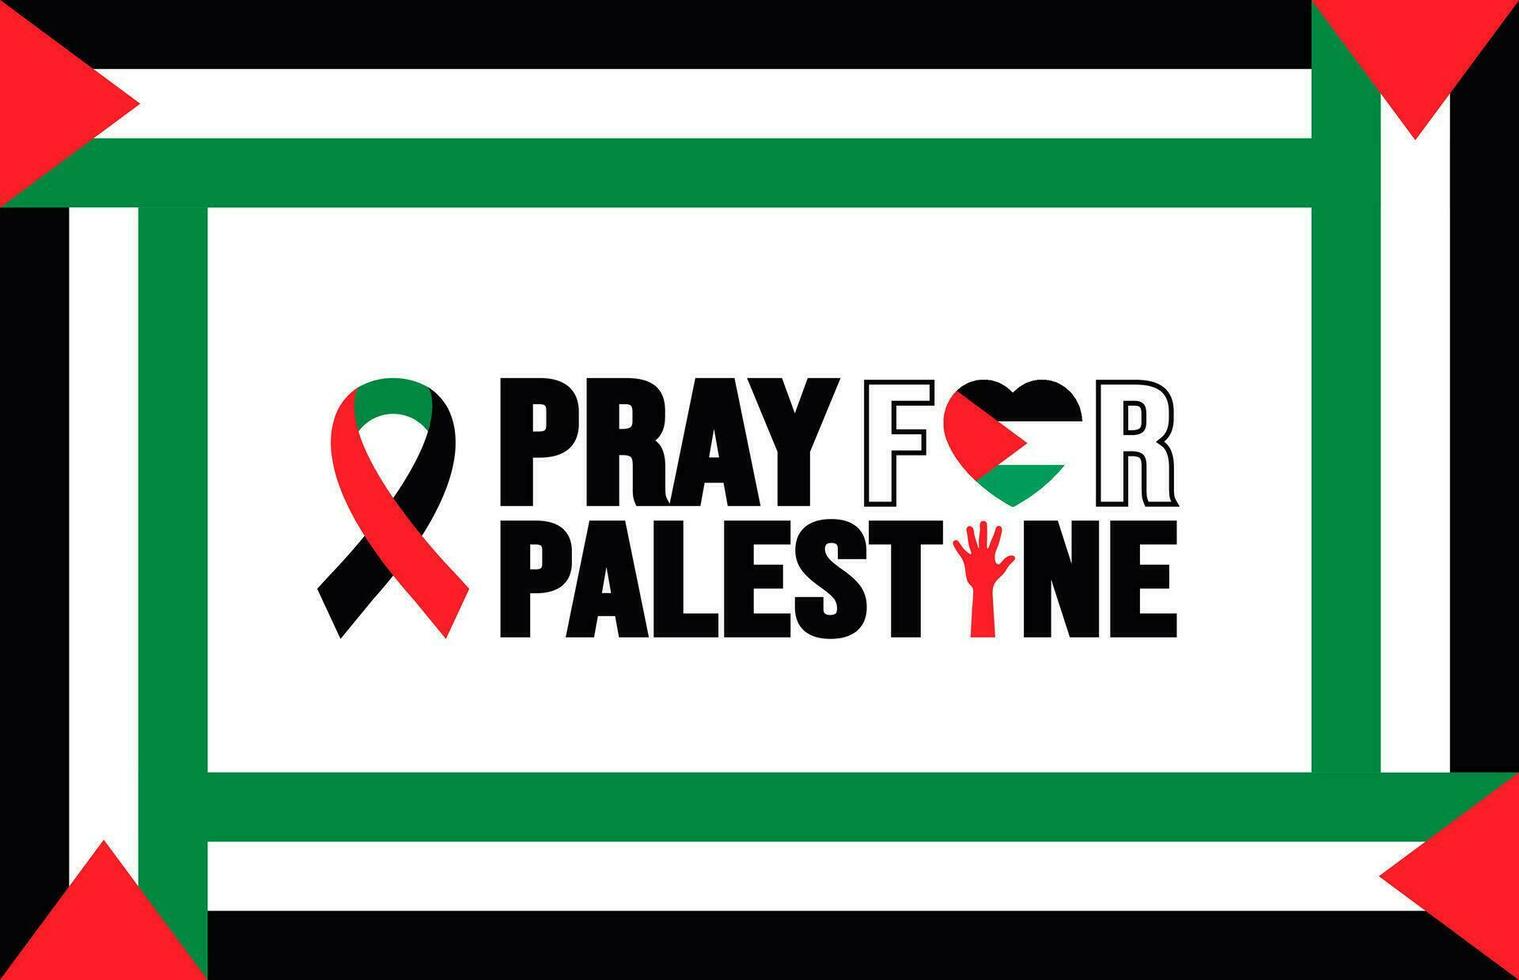 pray for Palestine typography concept background design template with Palestine national flag. vector